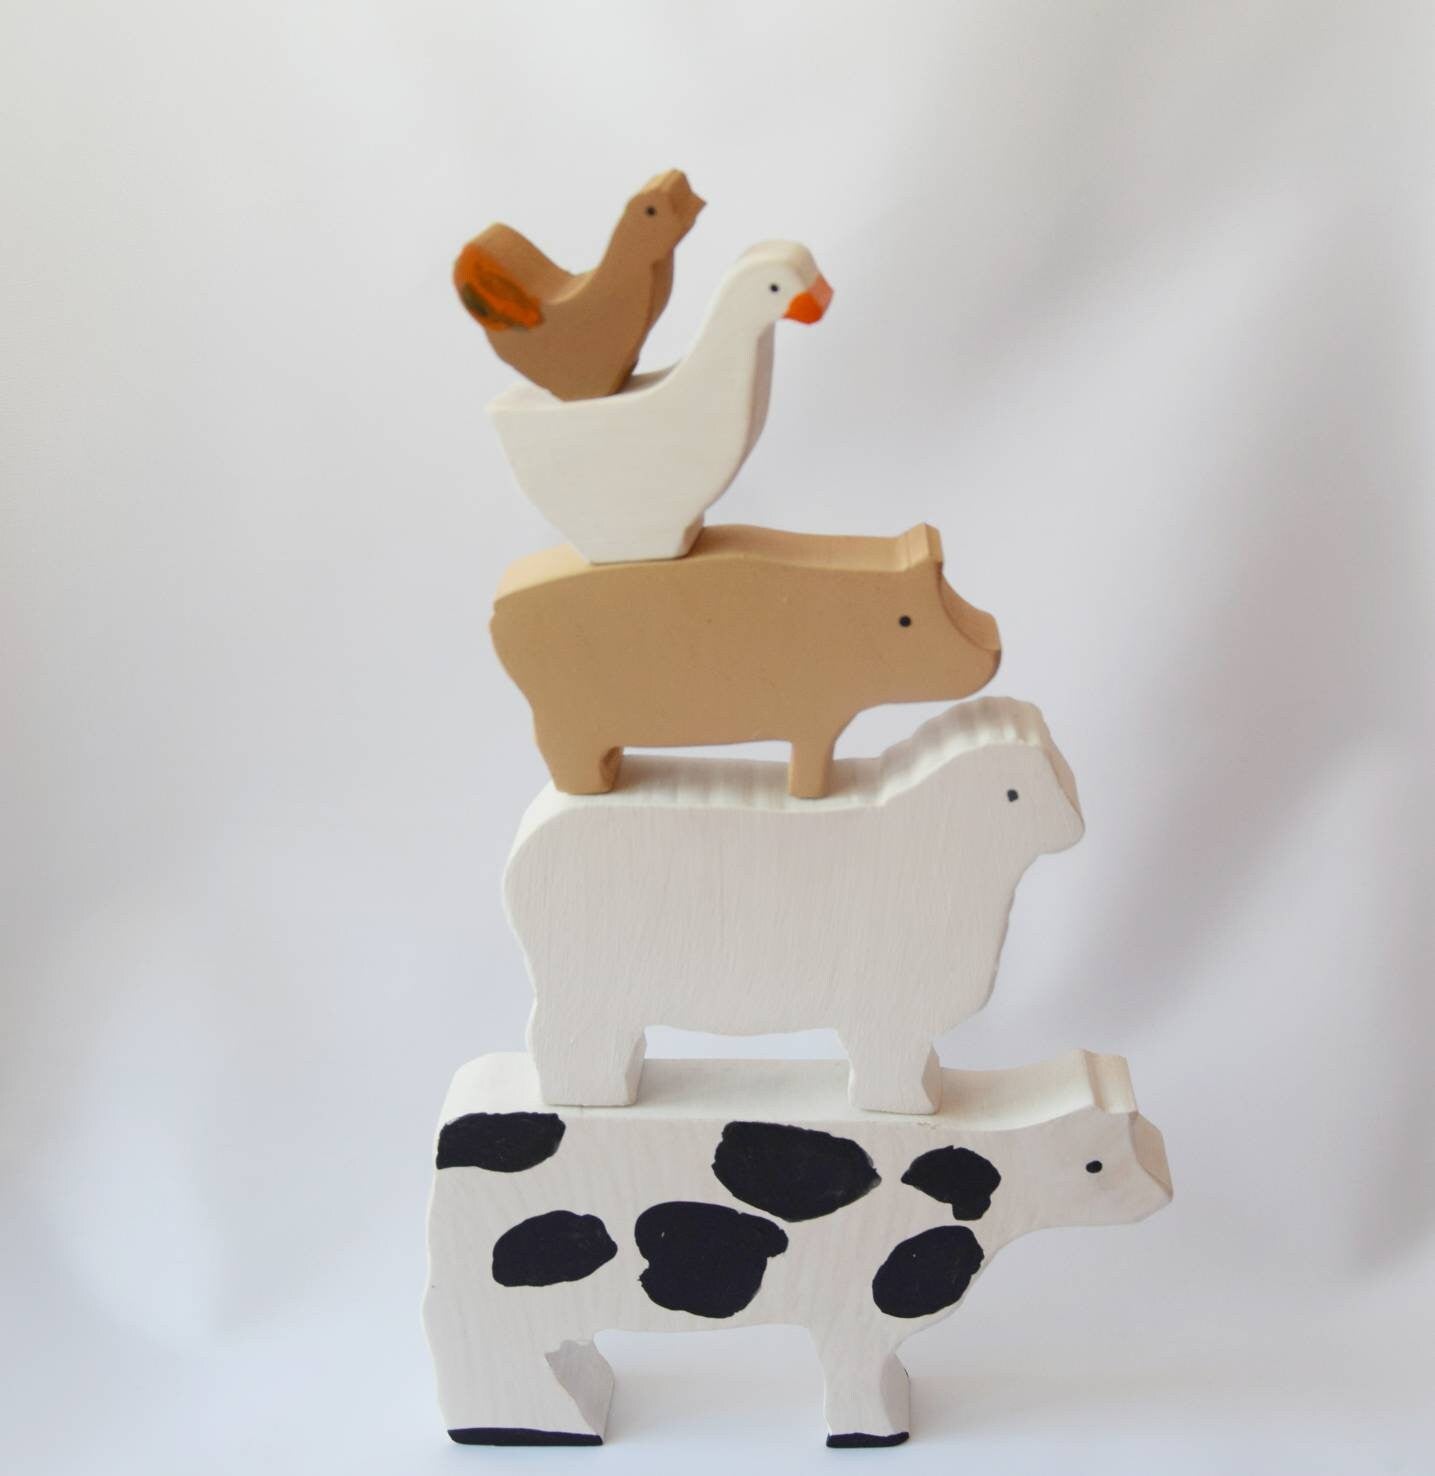 Wooden stacker animals toy, painted stacking animals, balance toy, balancing animals, farm animals toy, waldorf wooden toy, wooden toy set